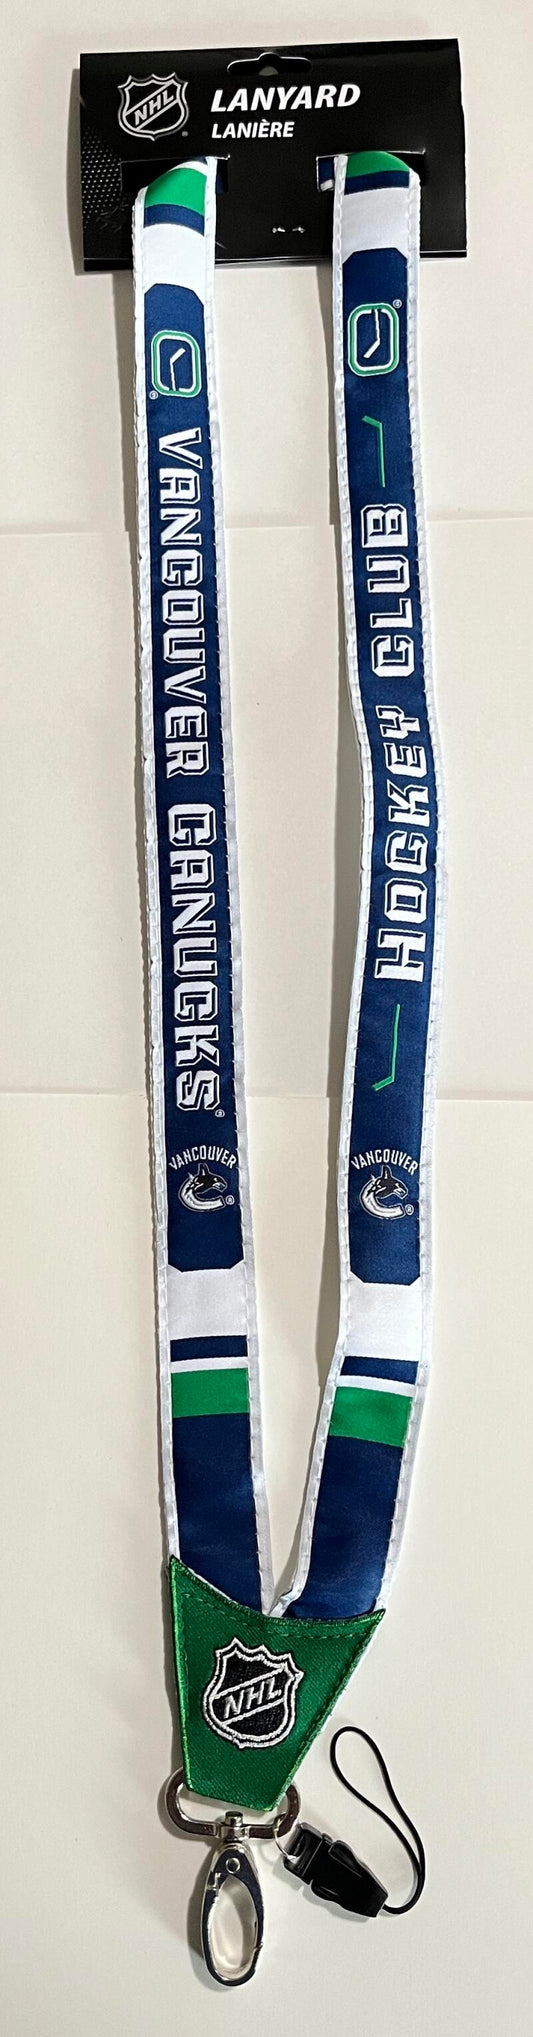 Vancouver Canucks Woven Licensed NHL Hockey Lanyard Metal Clasp Image 1